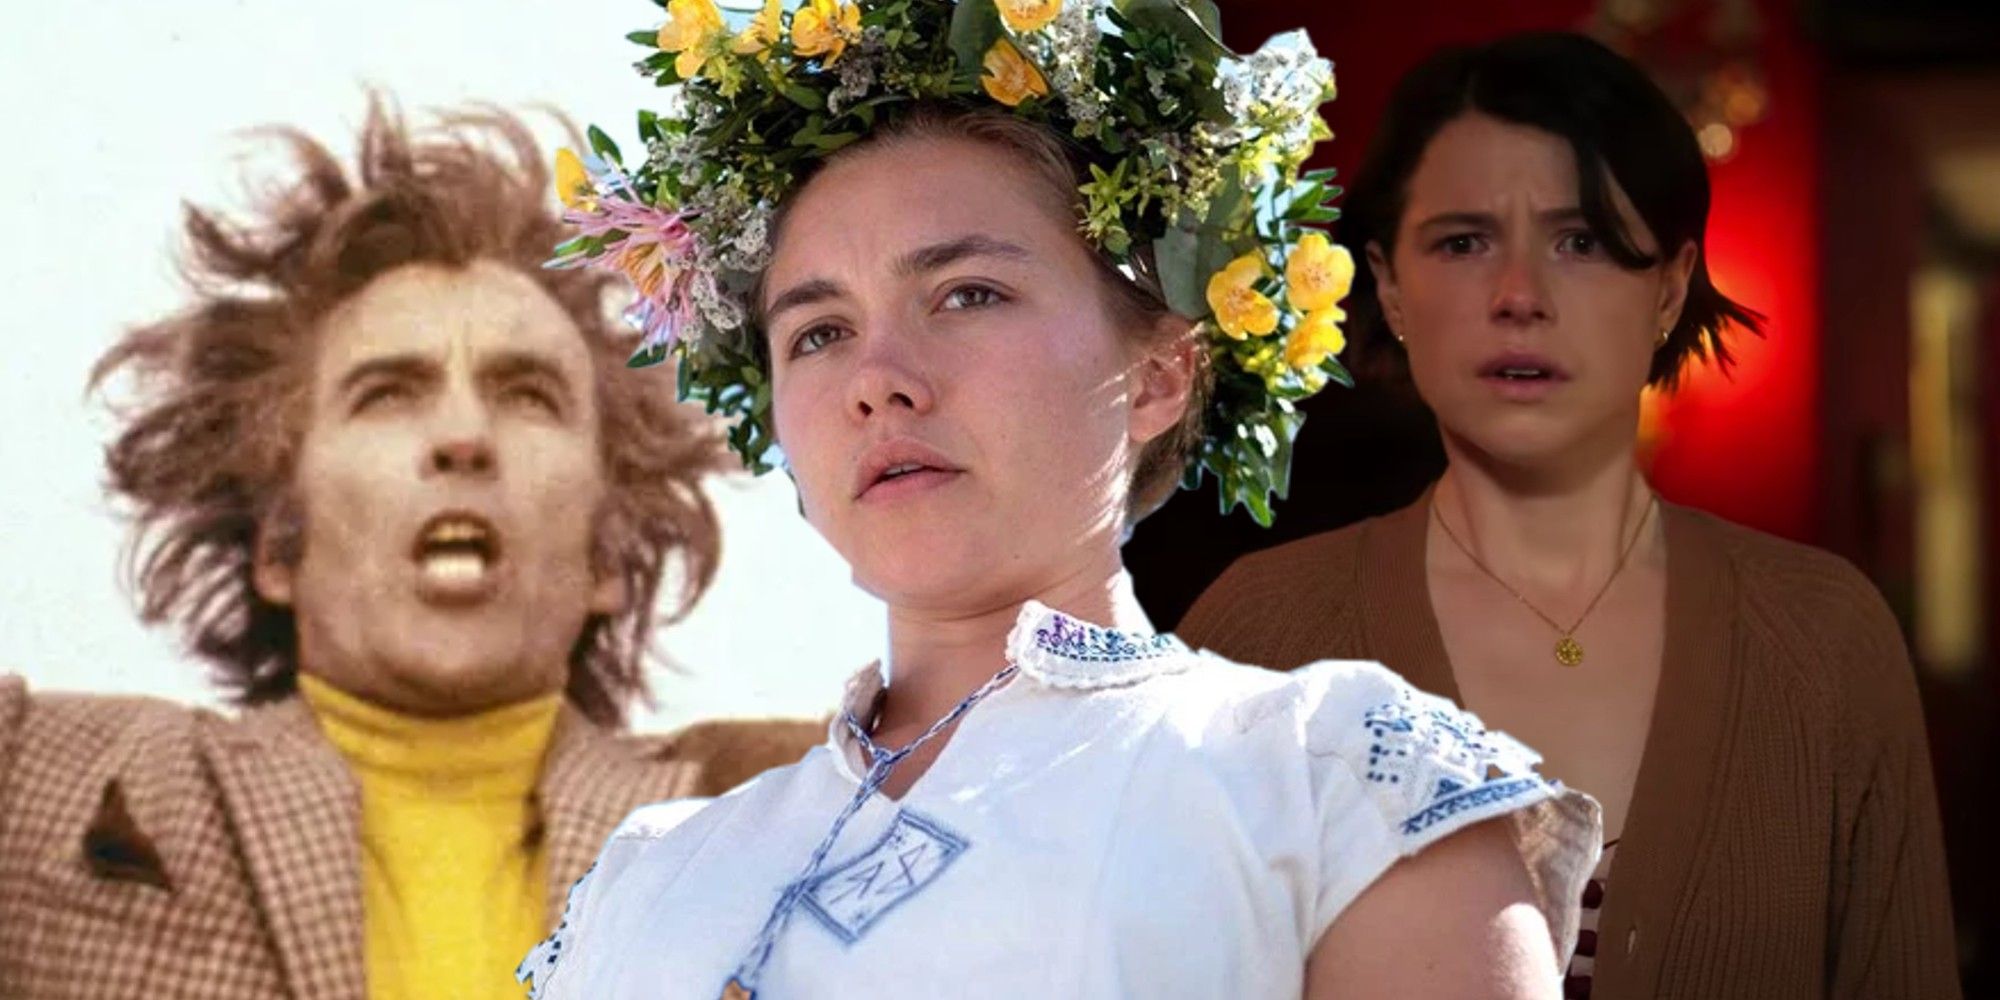 Collage of characters from The Wicker Man, Midsommar and Men